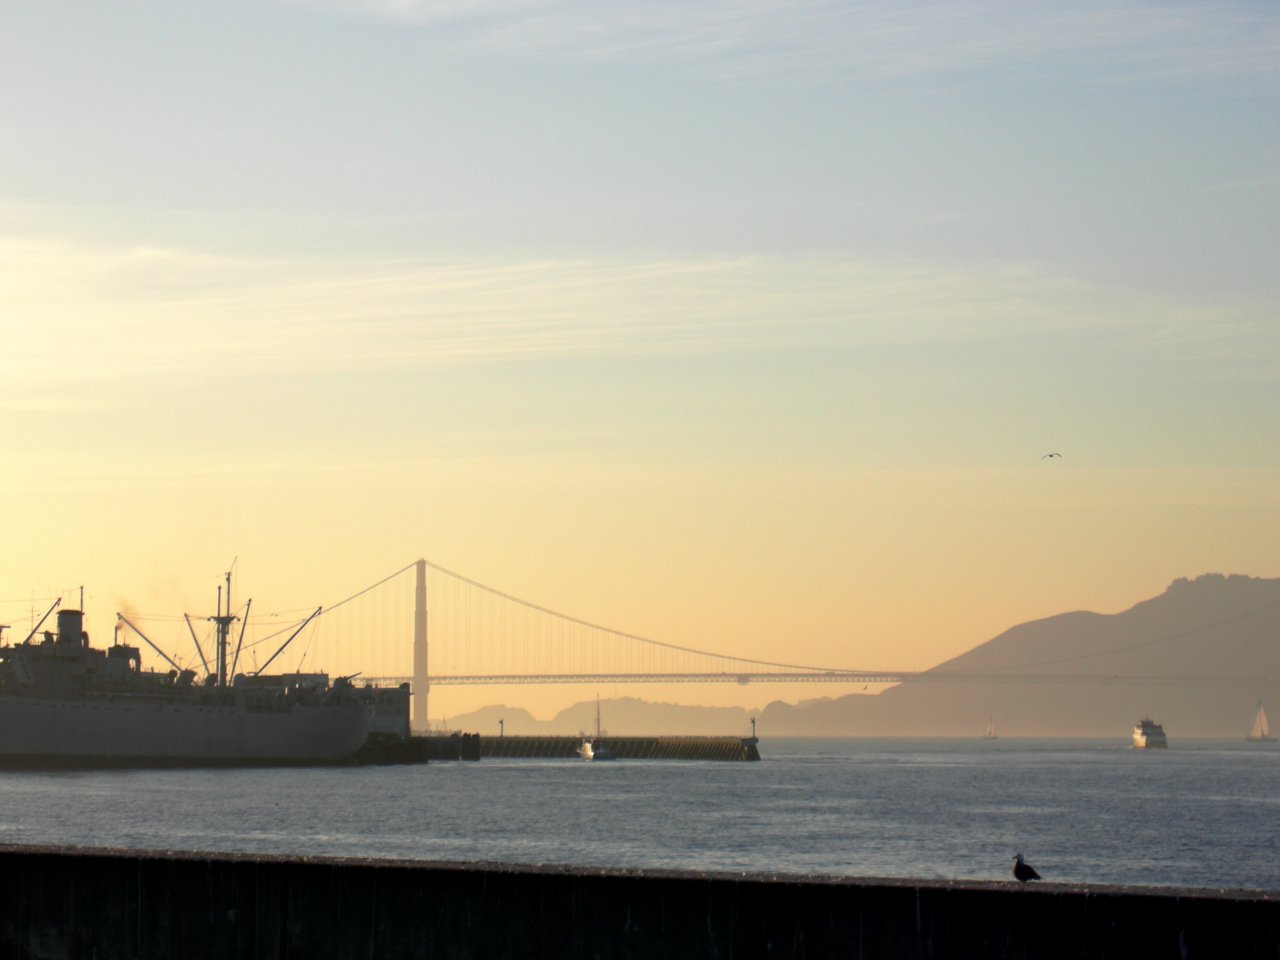 A view of the bridge from Pier 39.